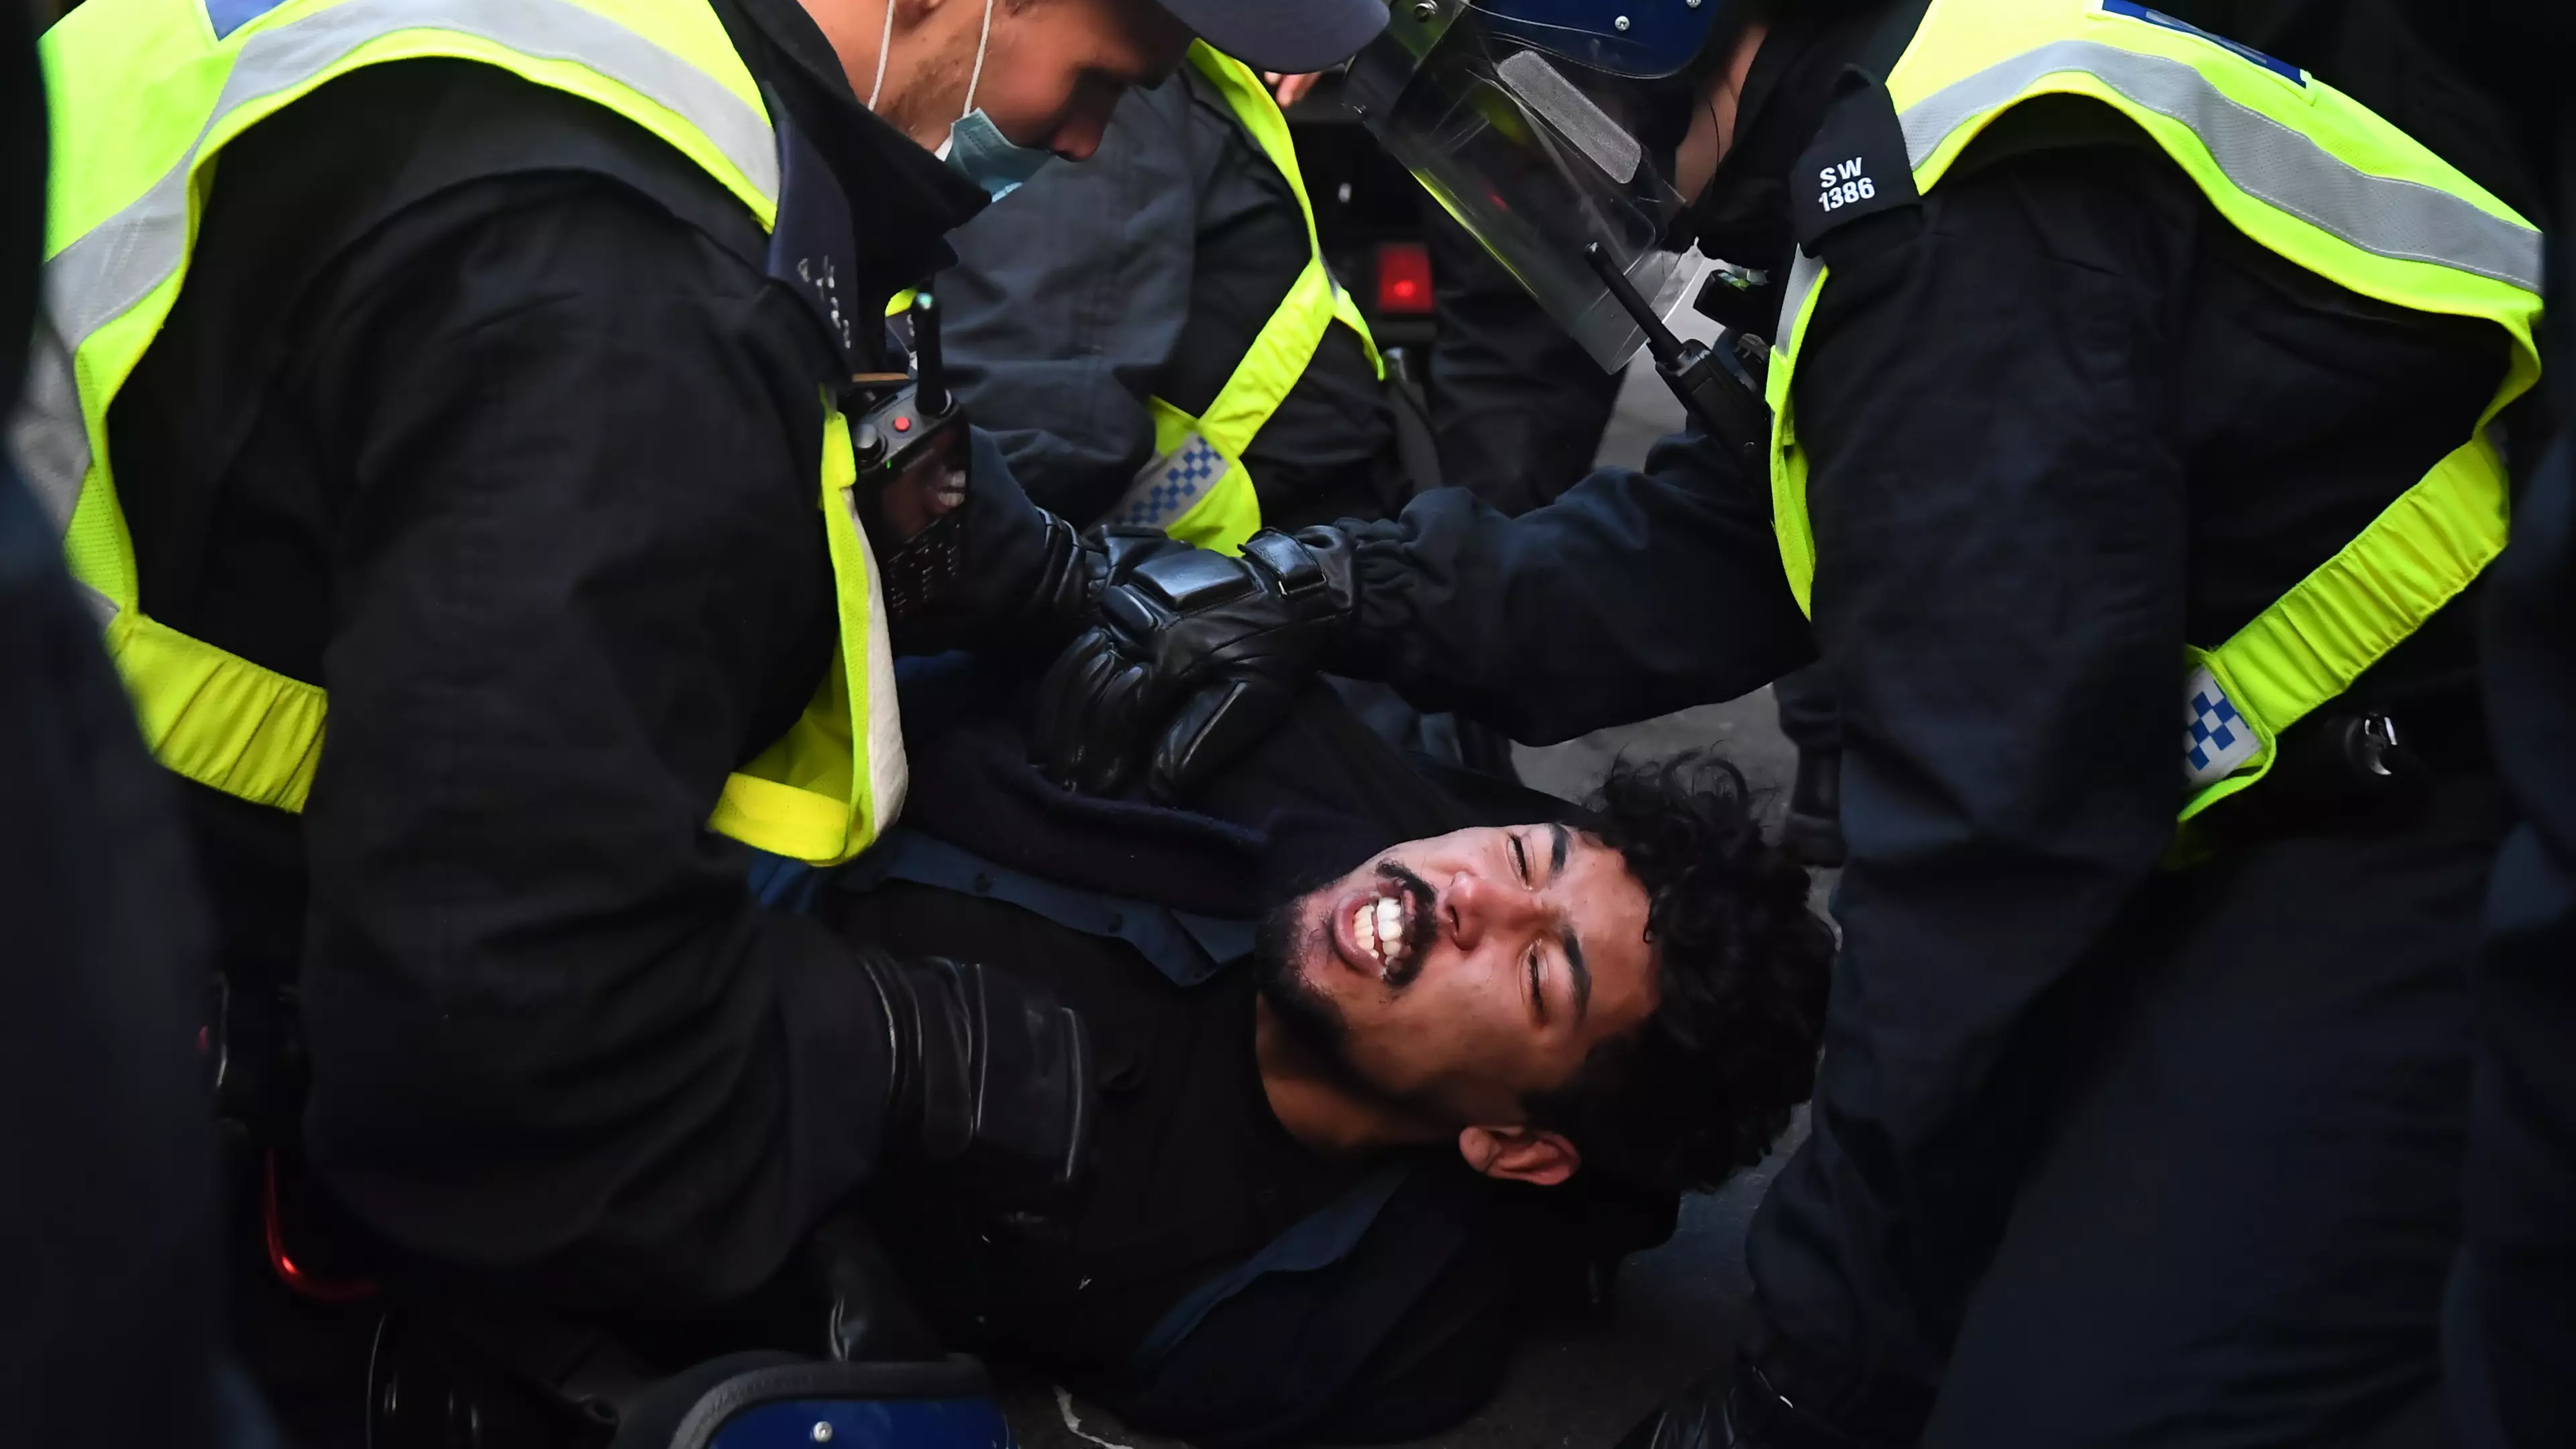 More Than 60 Arrested As Anti-Lockdown Protestors Clash With Police In London